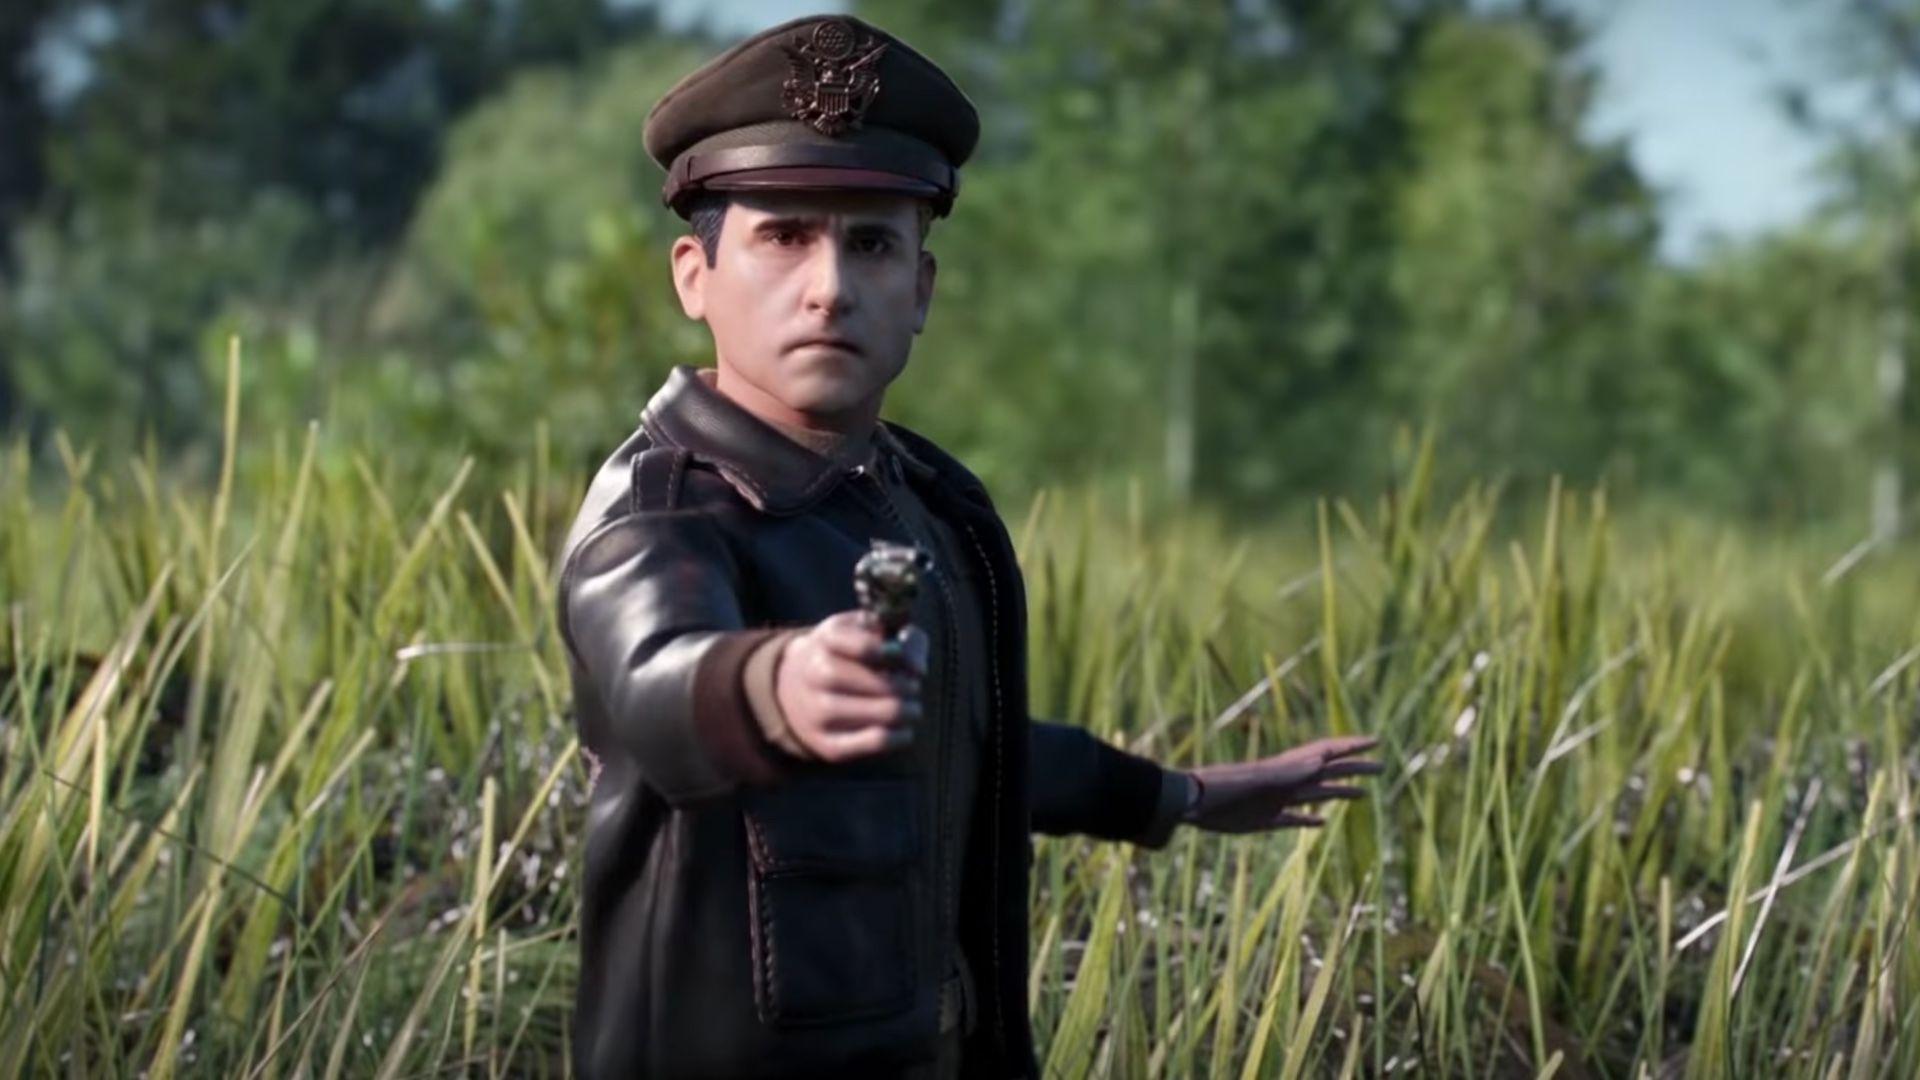 Welcome To Marwen 2018 Movie Wallpapers